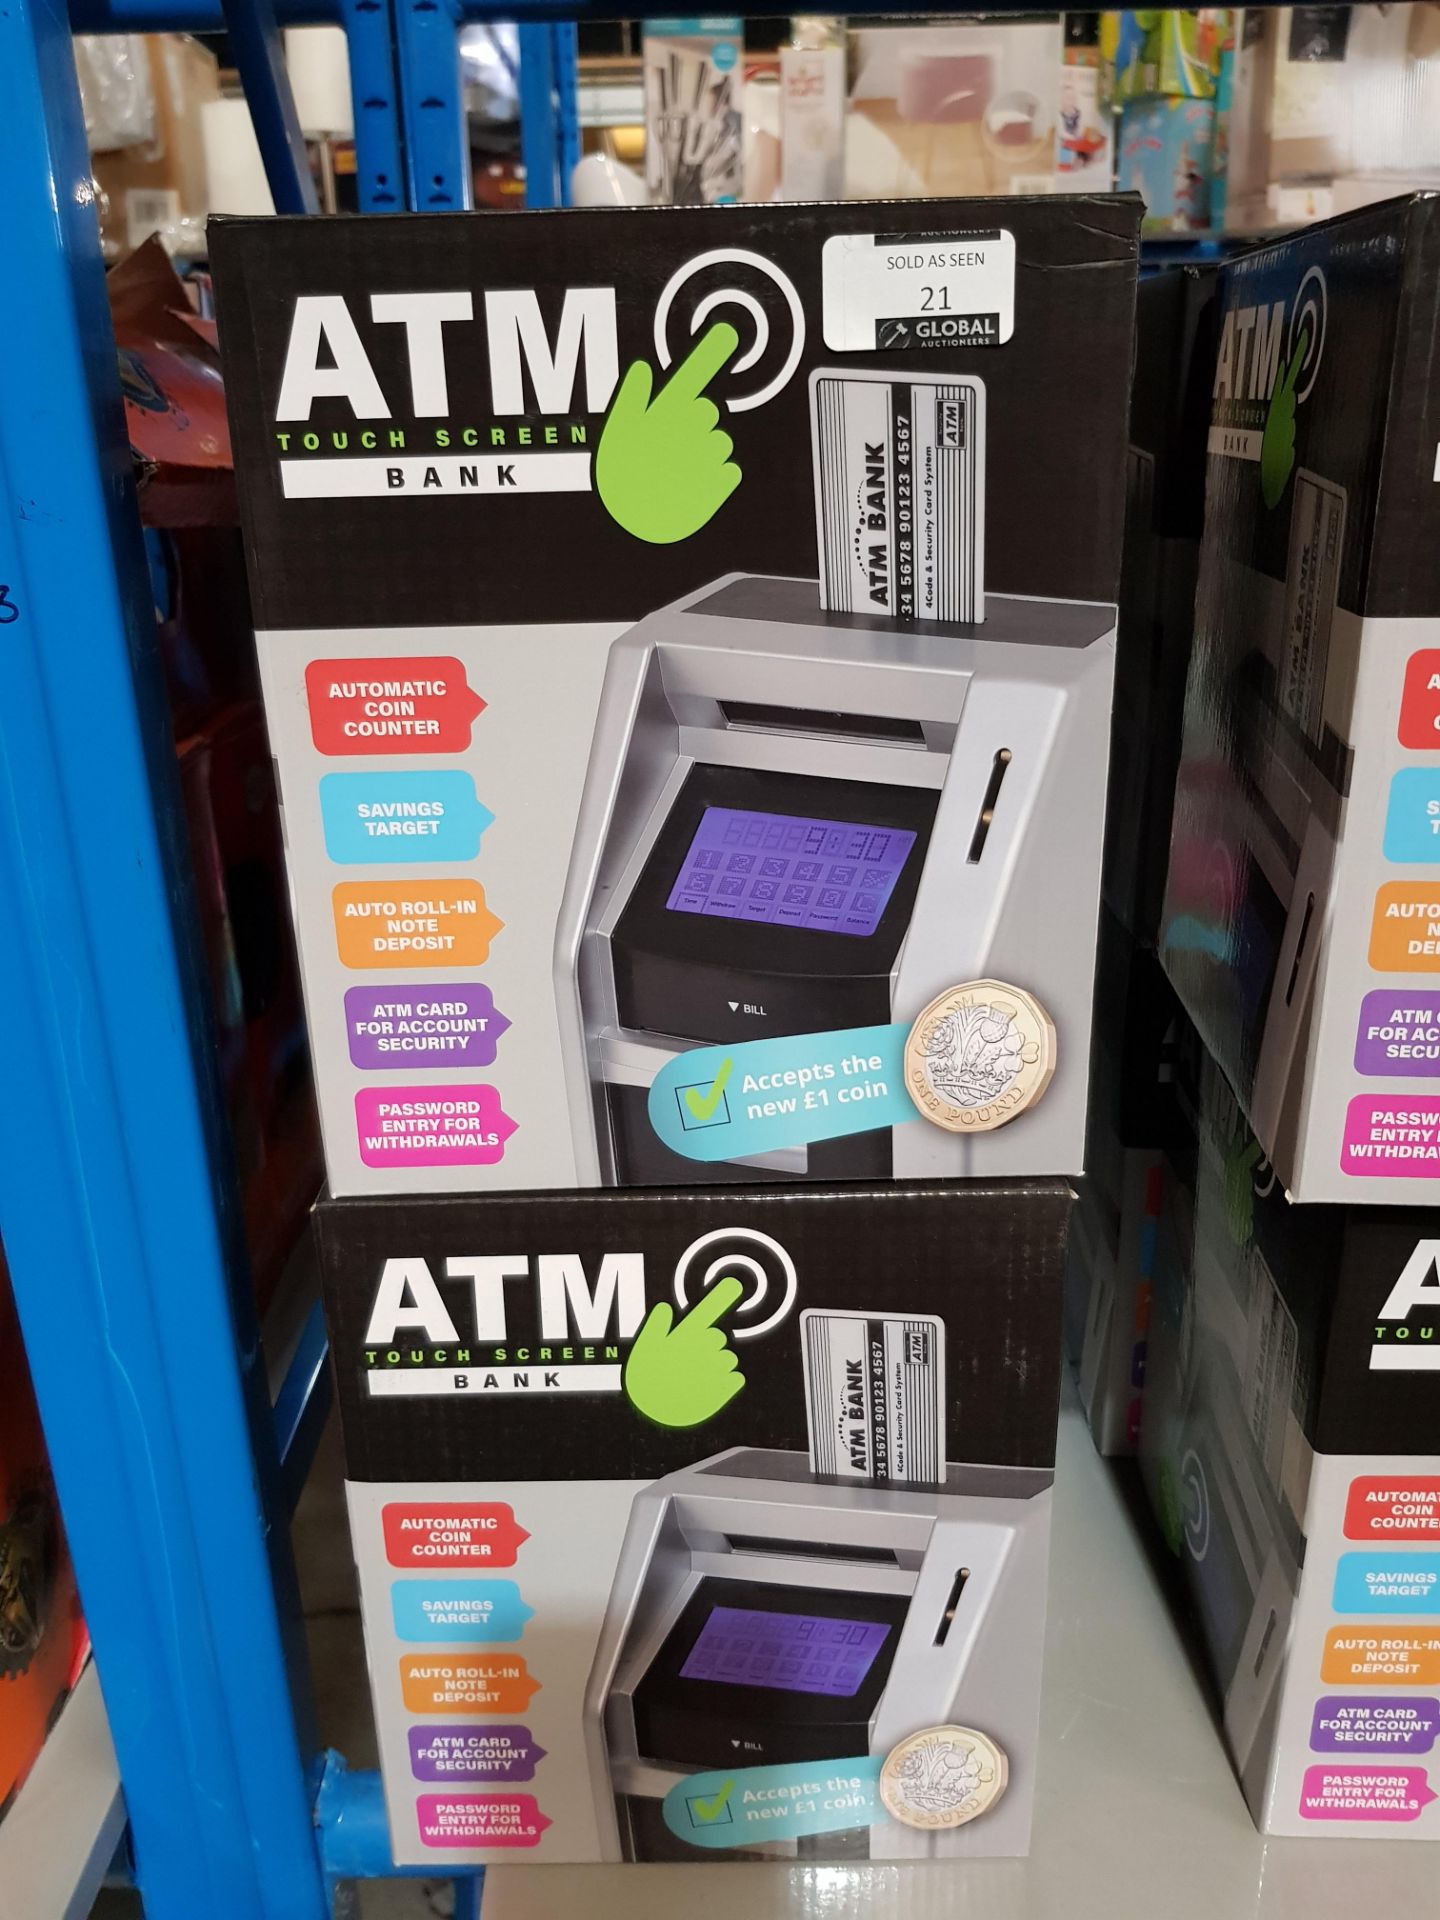 8 X ATM TOUCH SCREEN BANK